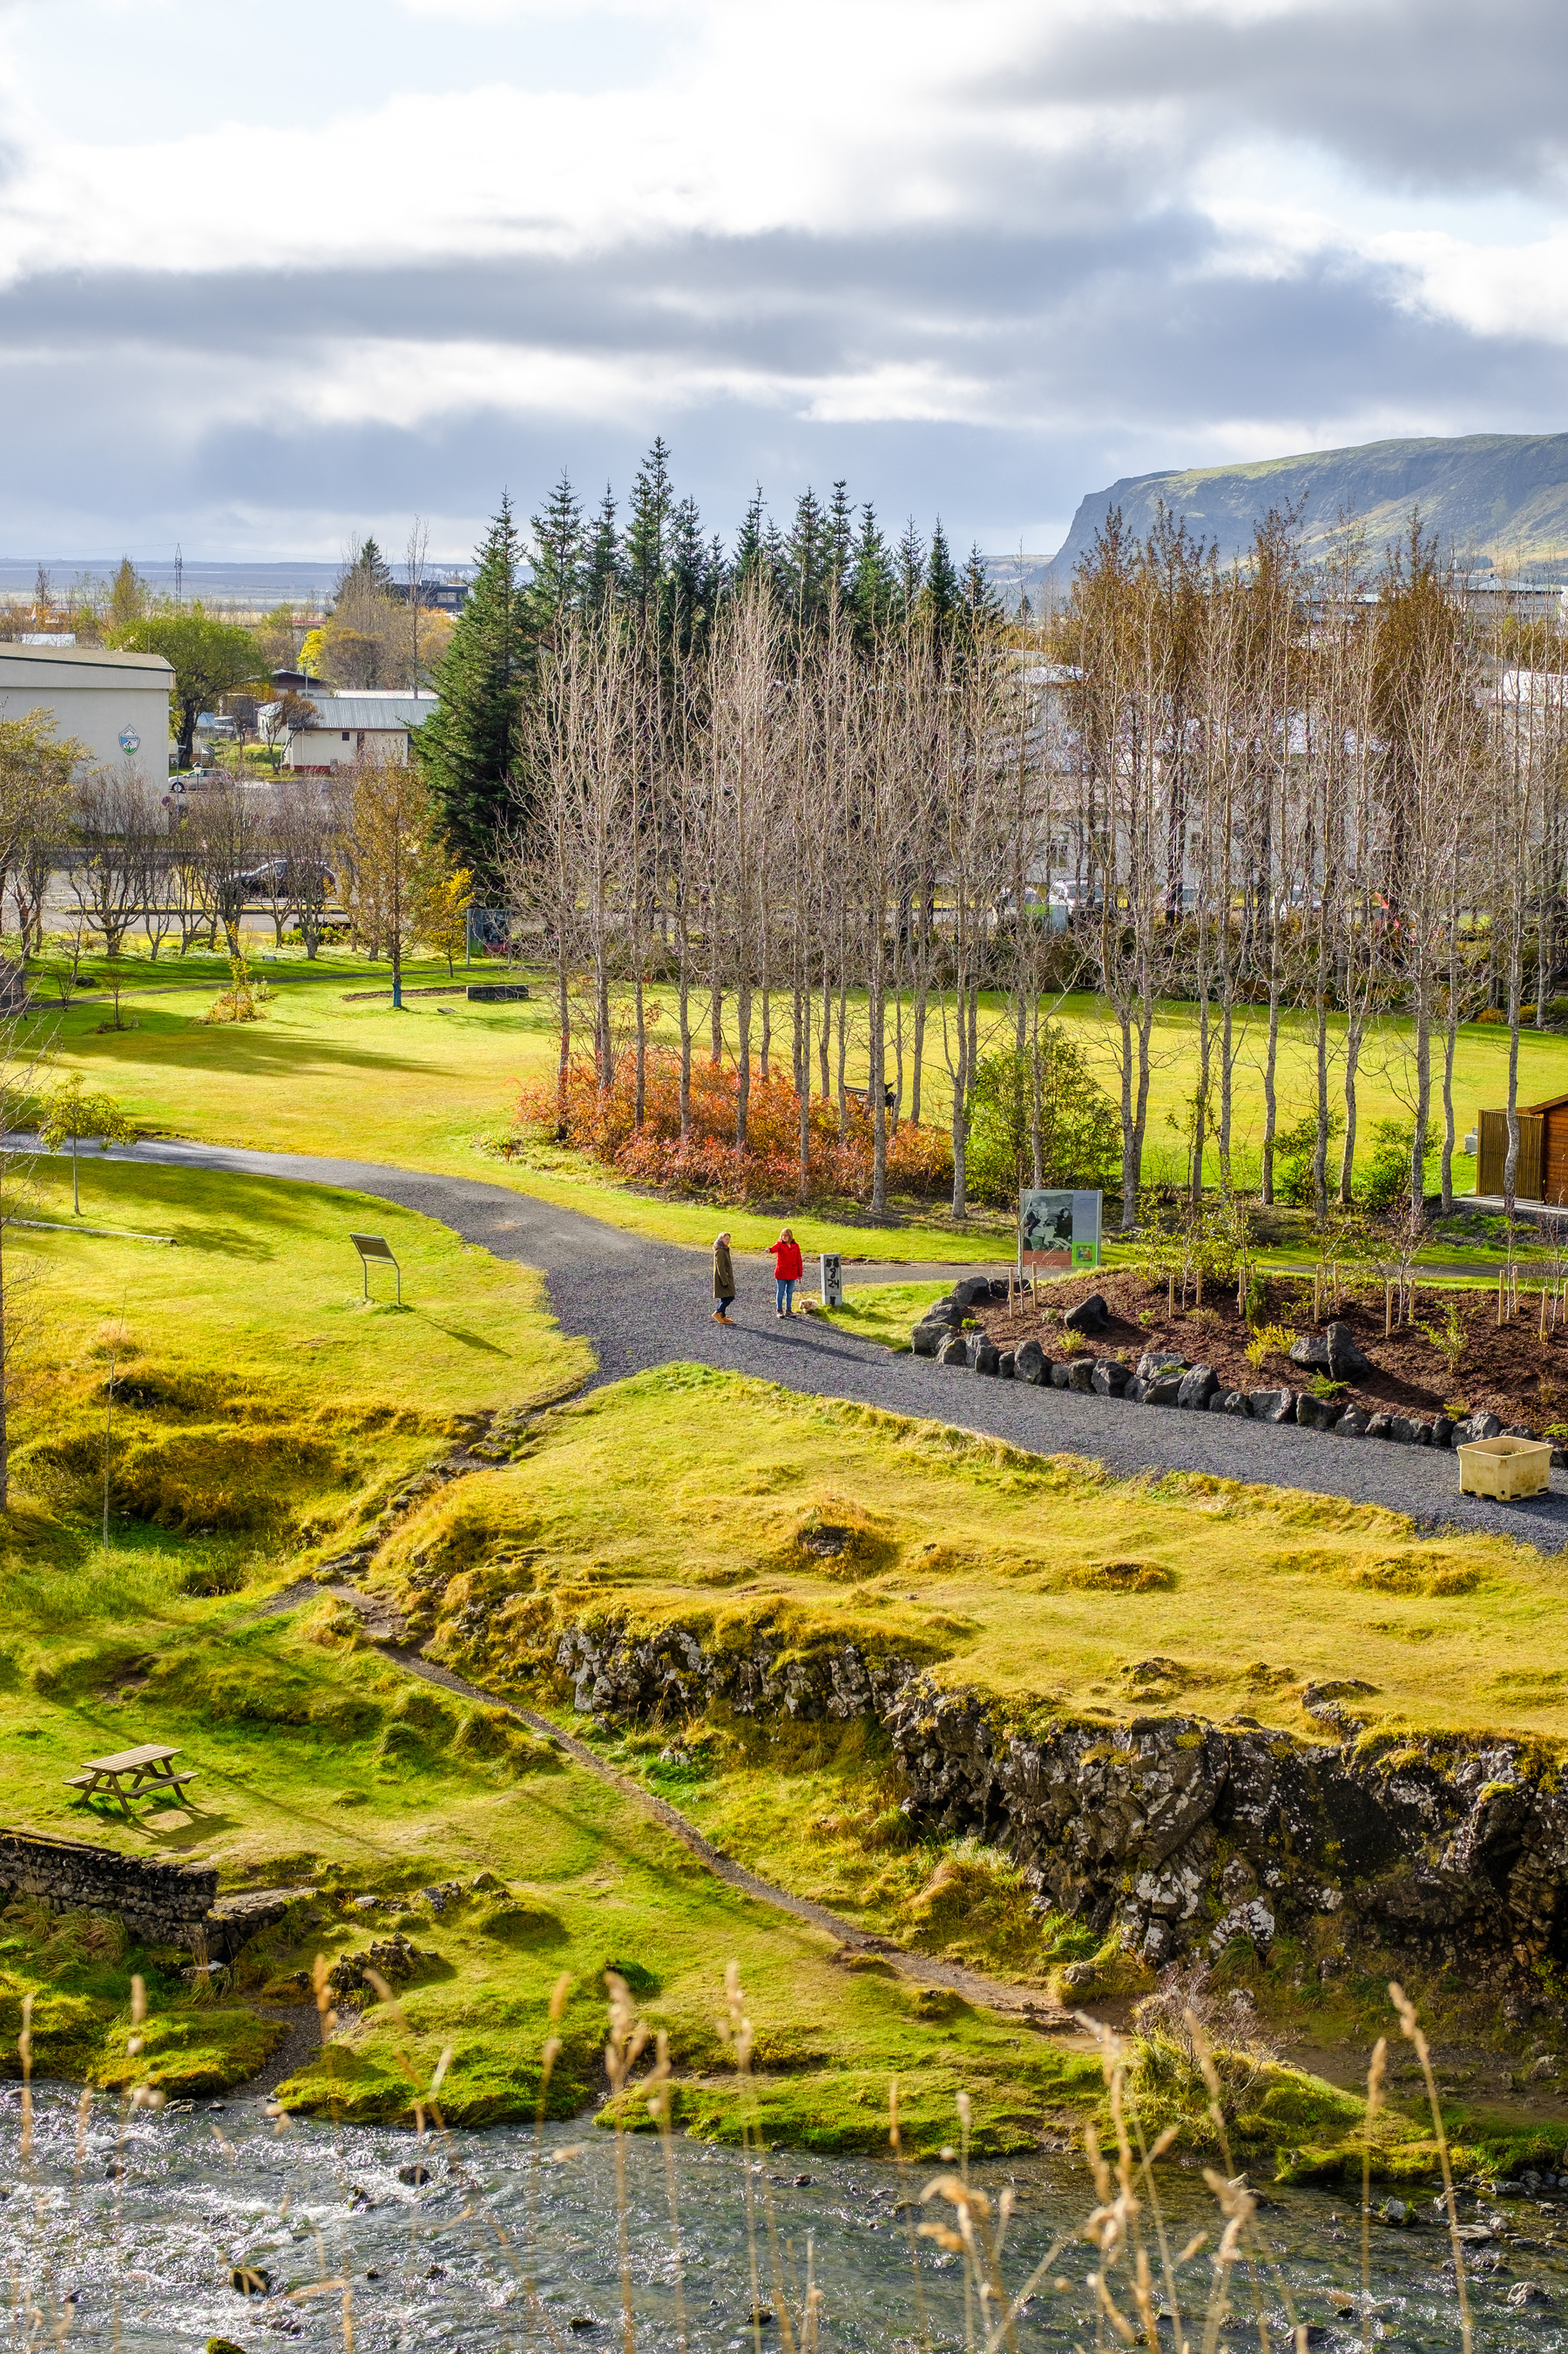 A view of Hveragerði’s park from the hill on the opposite side of the river.